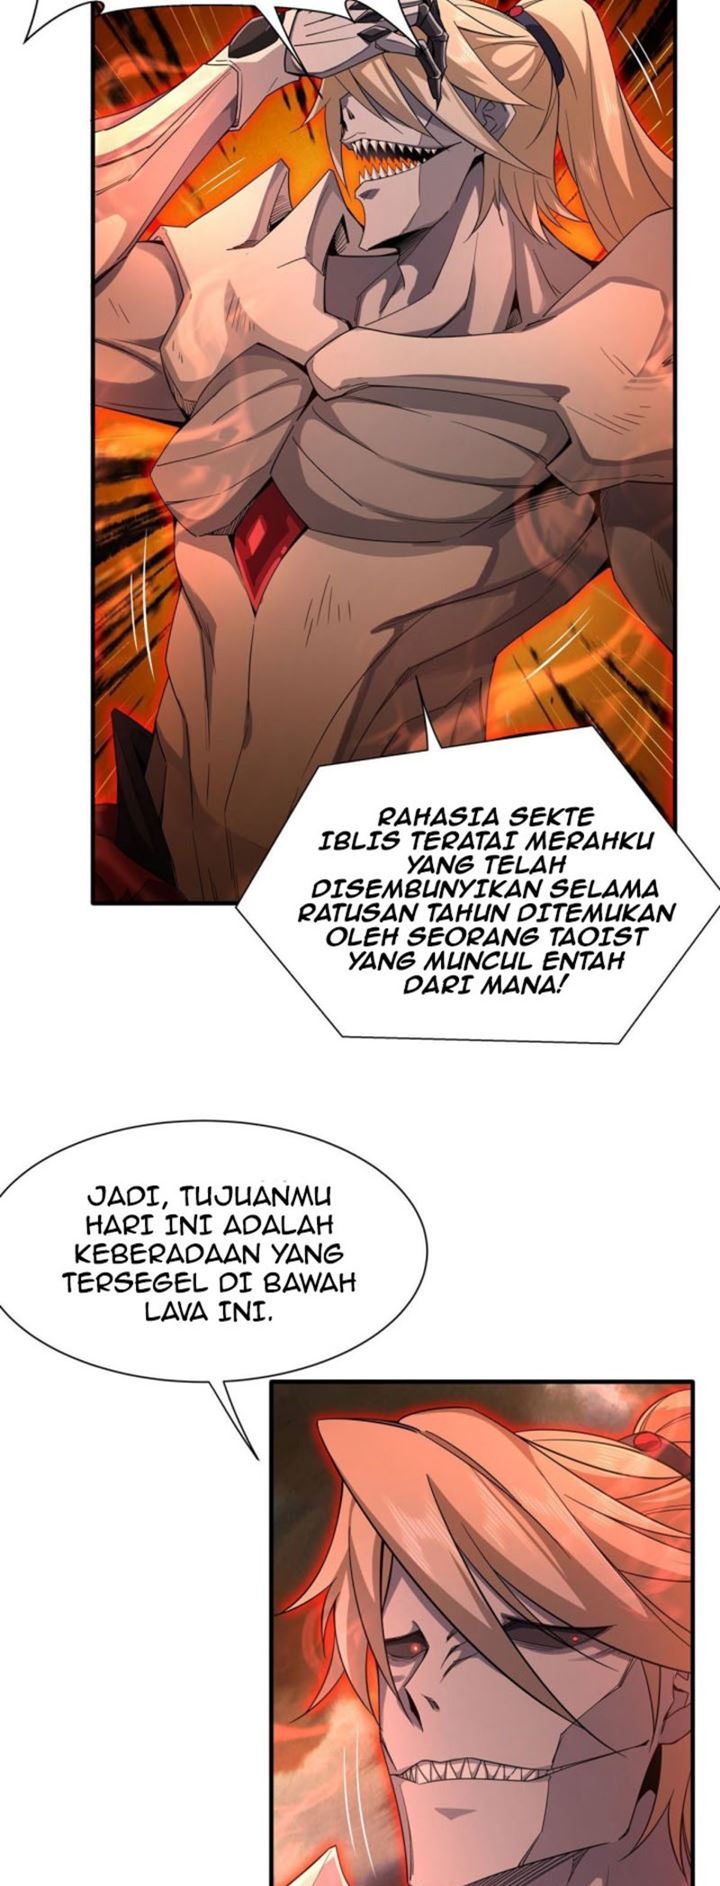 Dilarang COPAS - situs resmi www.mangacanblog.com - Komik my female apprentices are all big shots from the future 021 - chapter 21 22 Indonesia my female apprentices are all big shots from the future 021 - chapter 21 Terbaru 4|Baca Manga Komik Indonesia|Mangacan